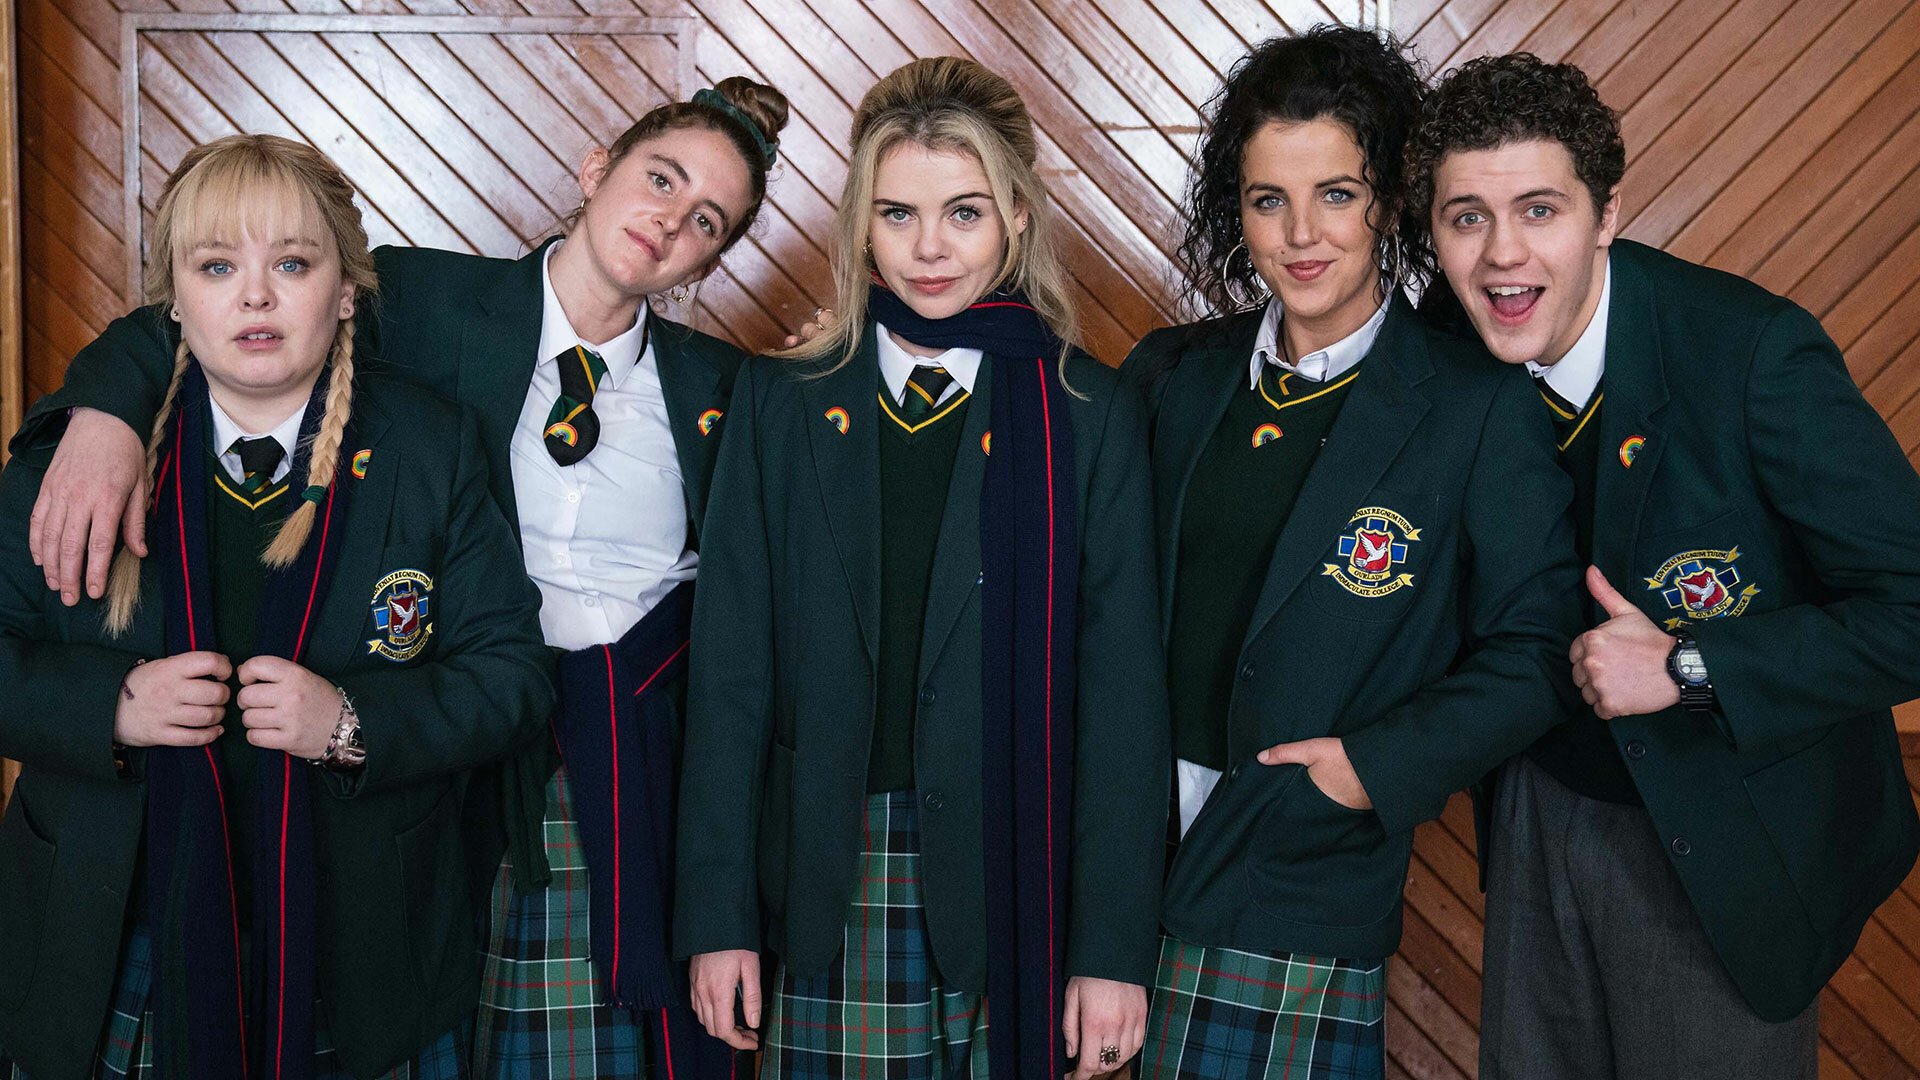 ‘Derry Girls’ is ending, but its legacy will live on